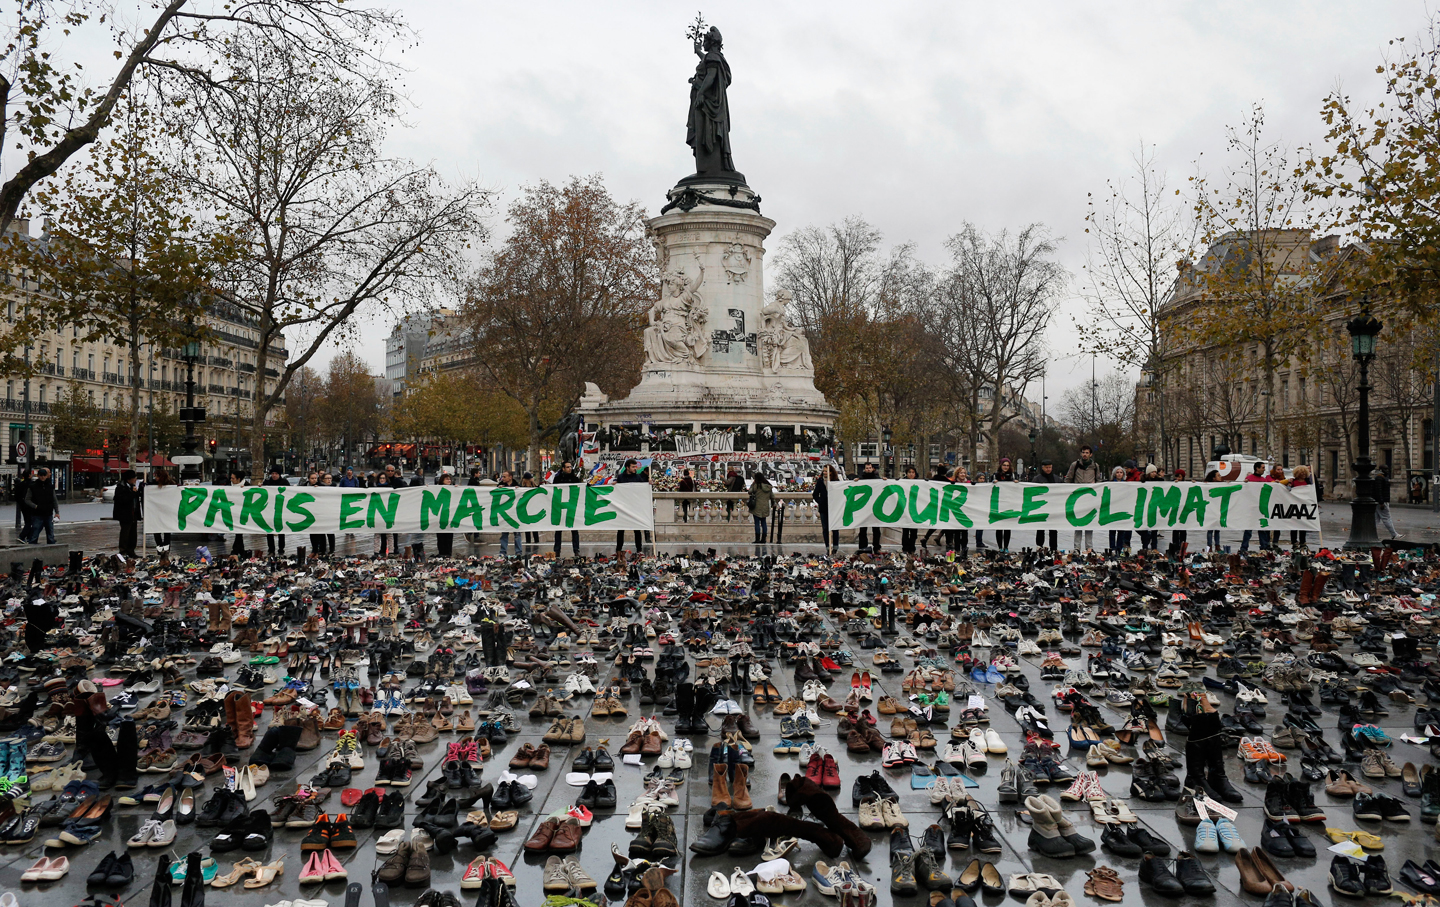 Start Making Sense: Naomi Klein on the Necessity of the Climate Protests in Paris